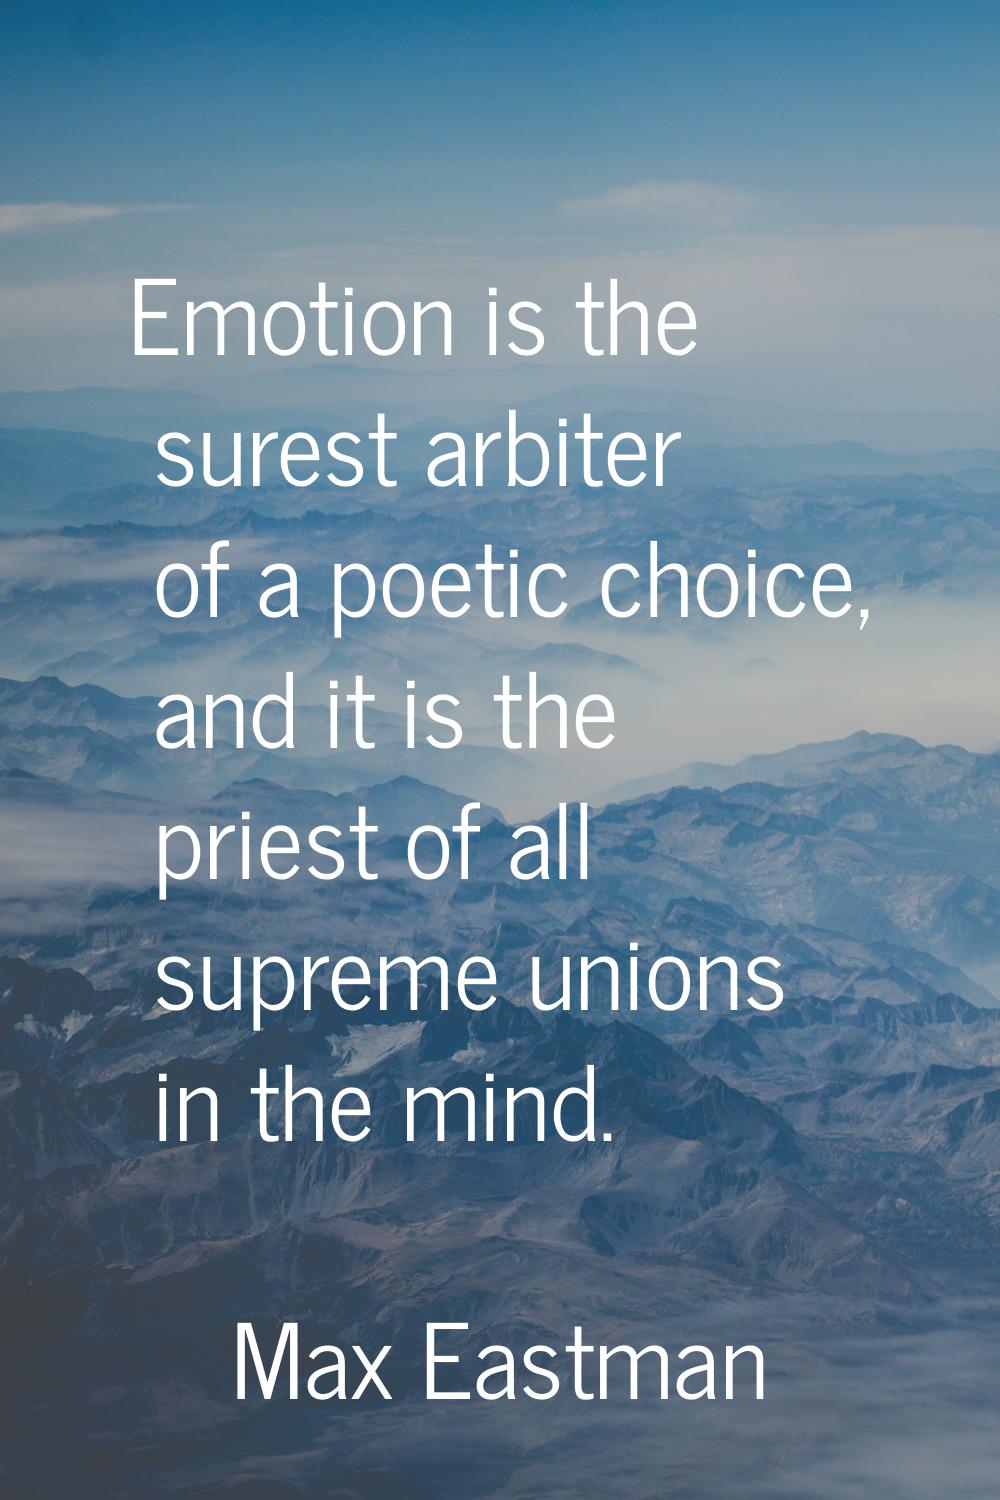 Emotion is the surest arbiter of a poetic choice, and it is the priest of all supreme unions in the